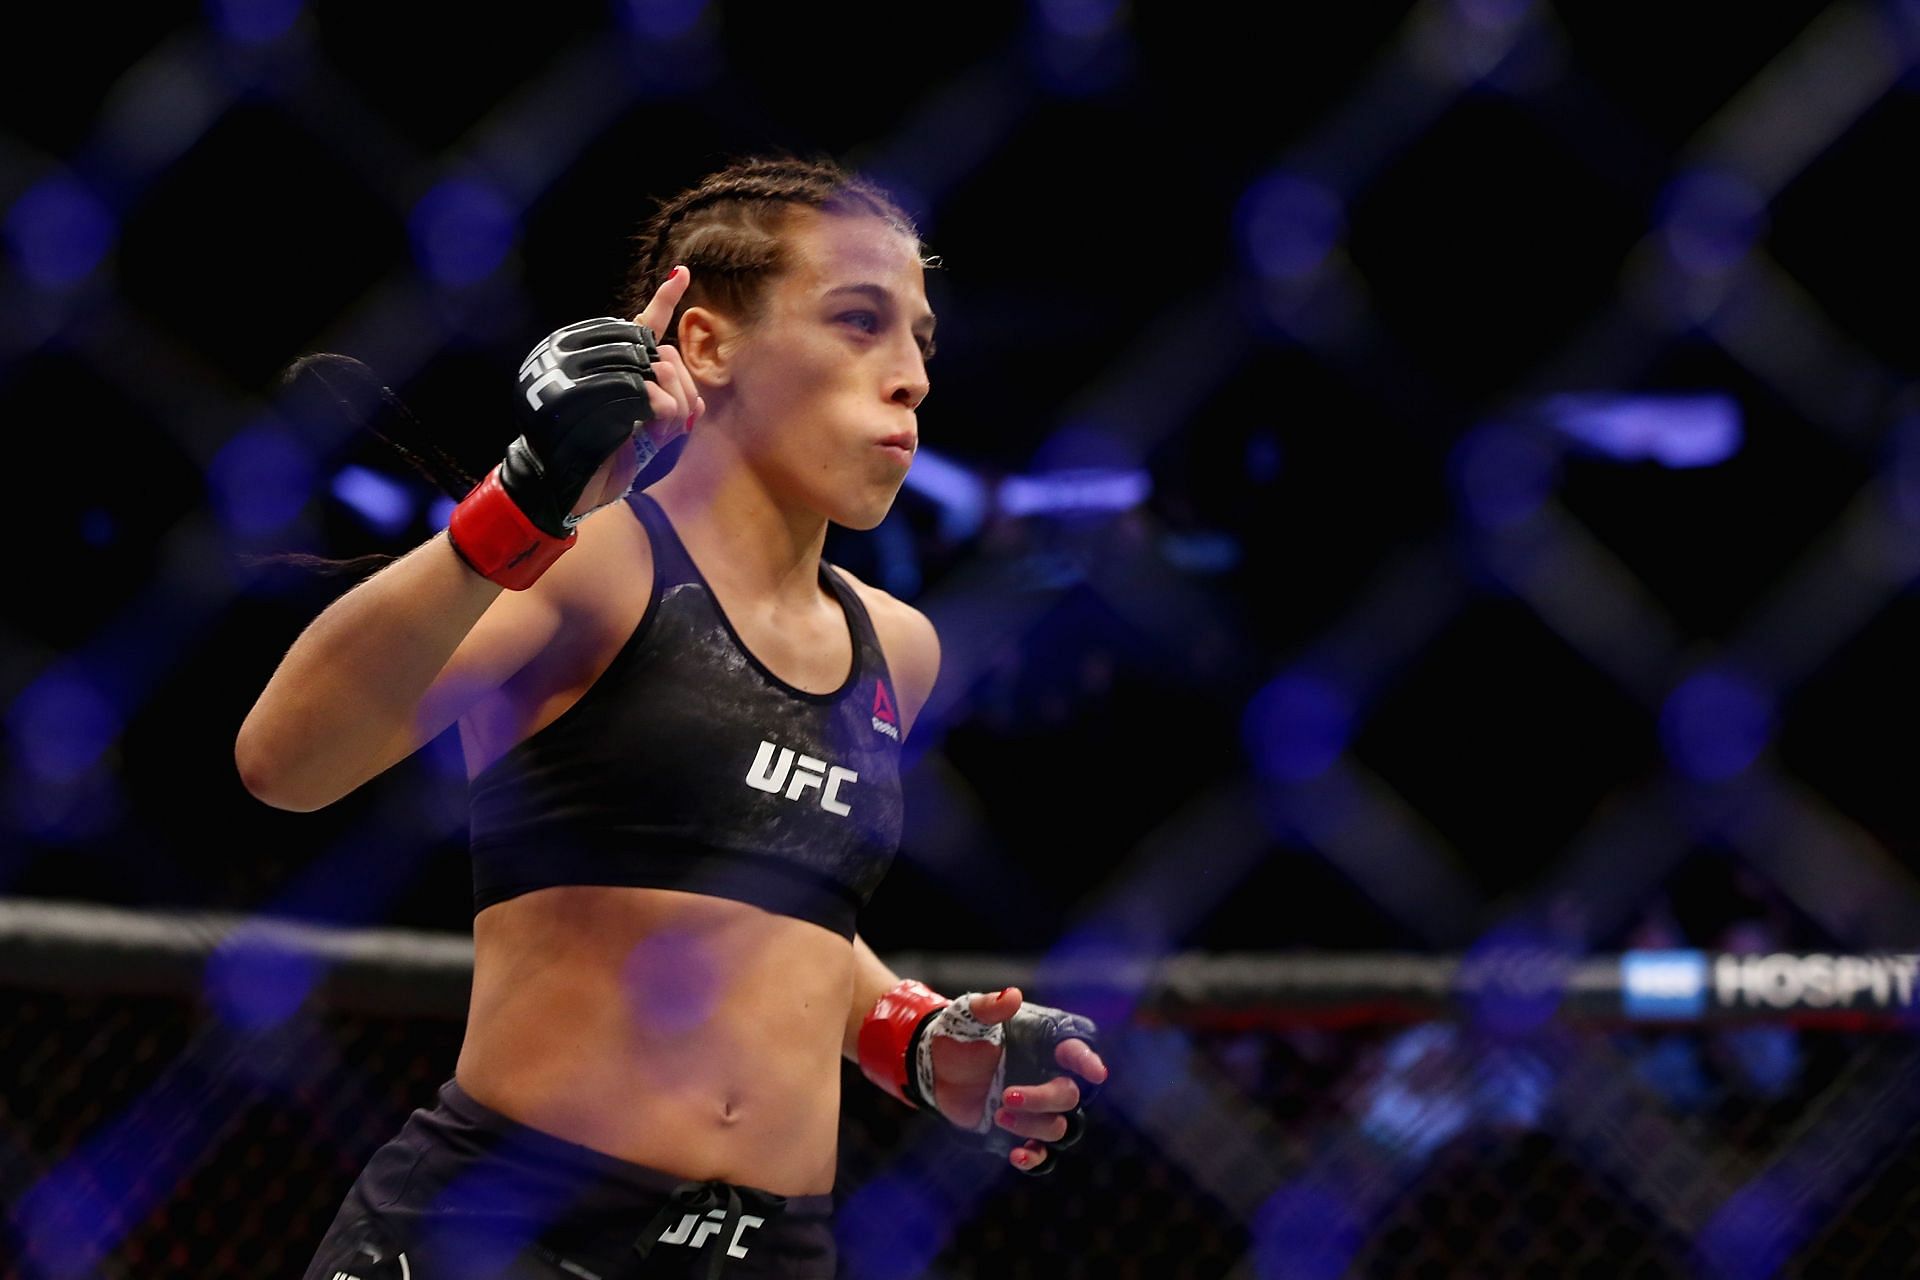 Joanna Jedrzejczyk will go down as an all-time great of the strawweight division